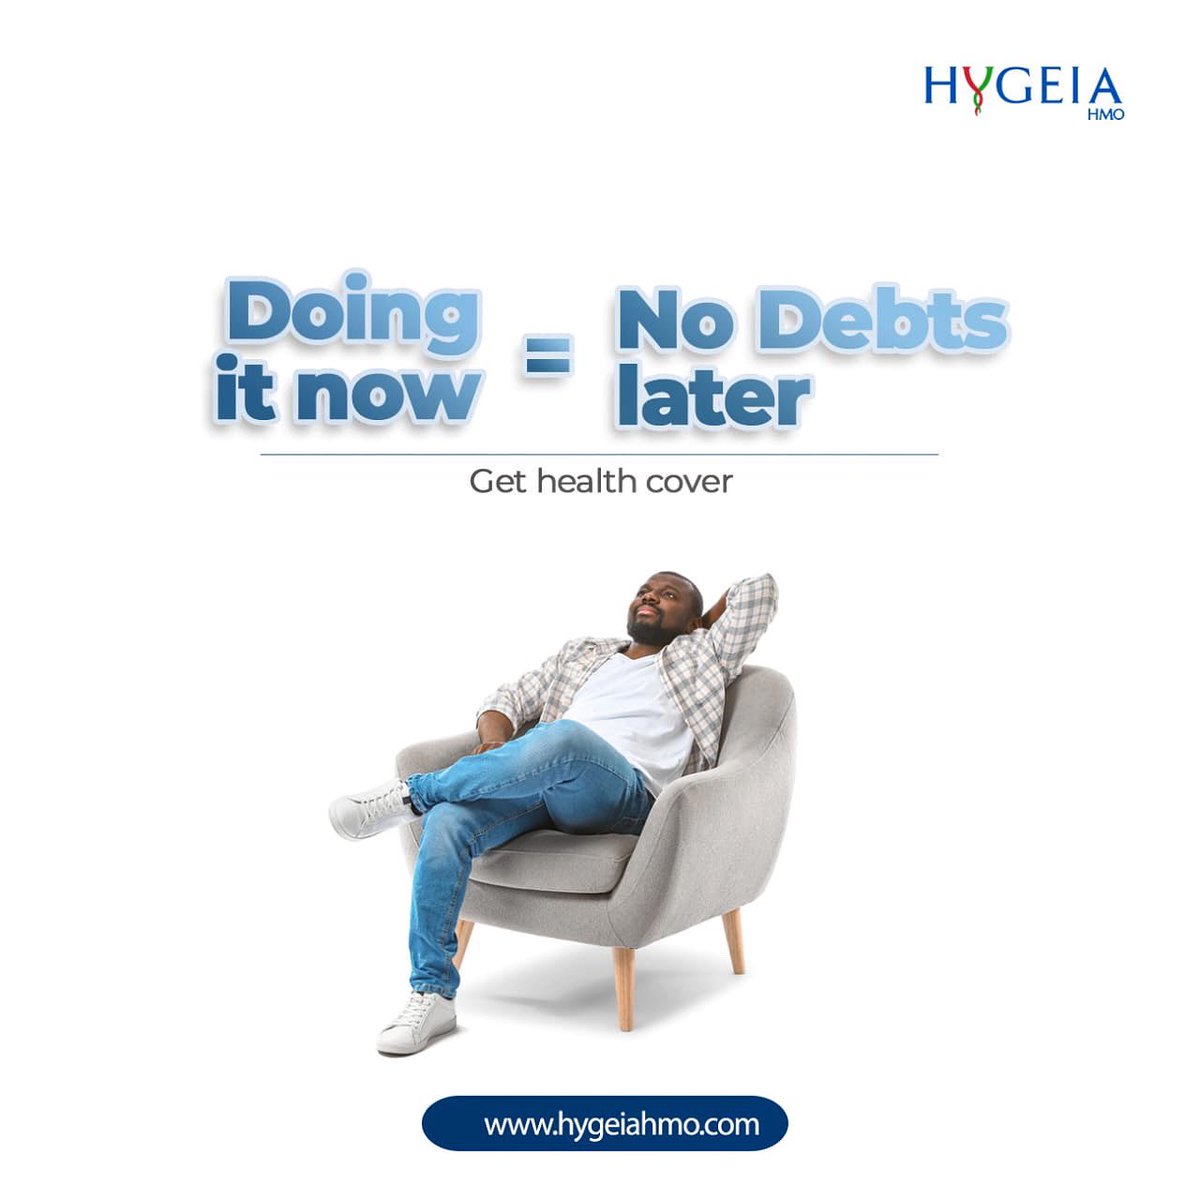 Securing your health now, with Hygeia HMO, means a future free from medical debts.

Act today for peace of mind tomorrow.

Explore comprehensive health coverage options at Hygeia HMO on our website: hygeiahmo.com.

#SecureYourHealth #HygeiaHMO